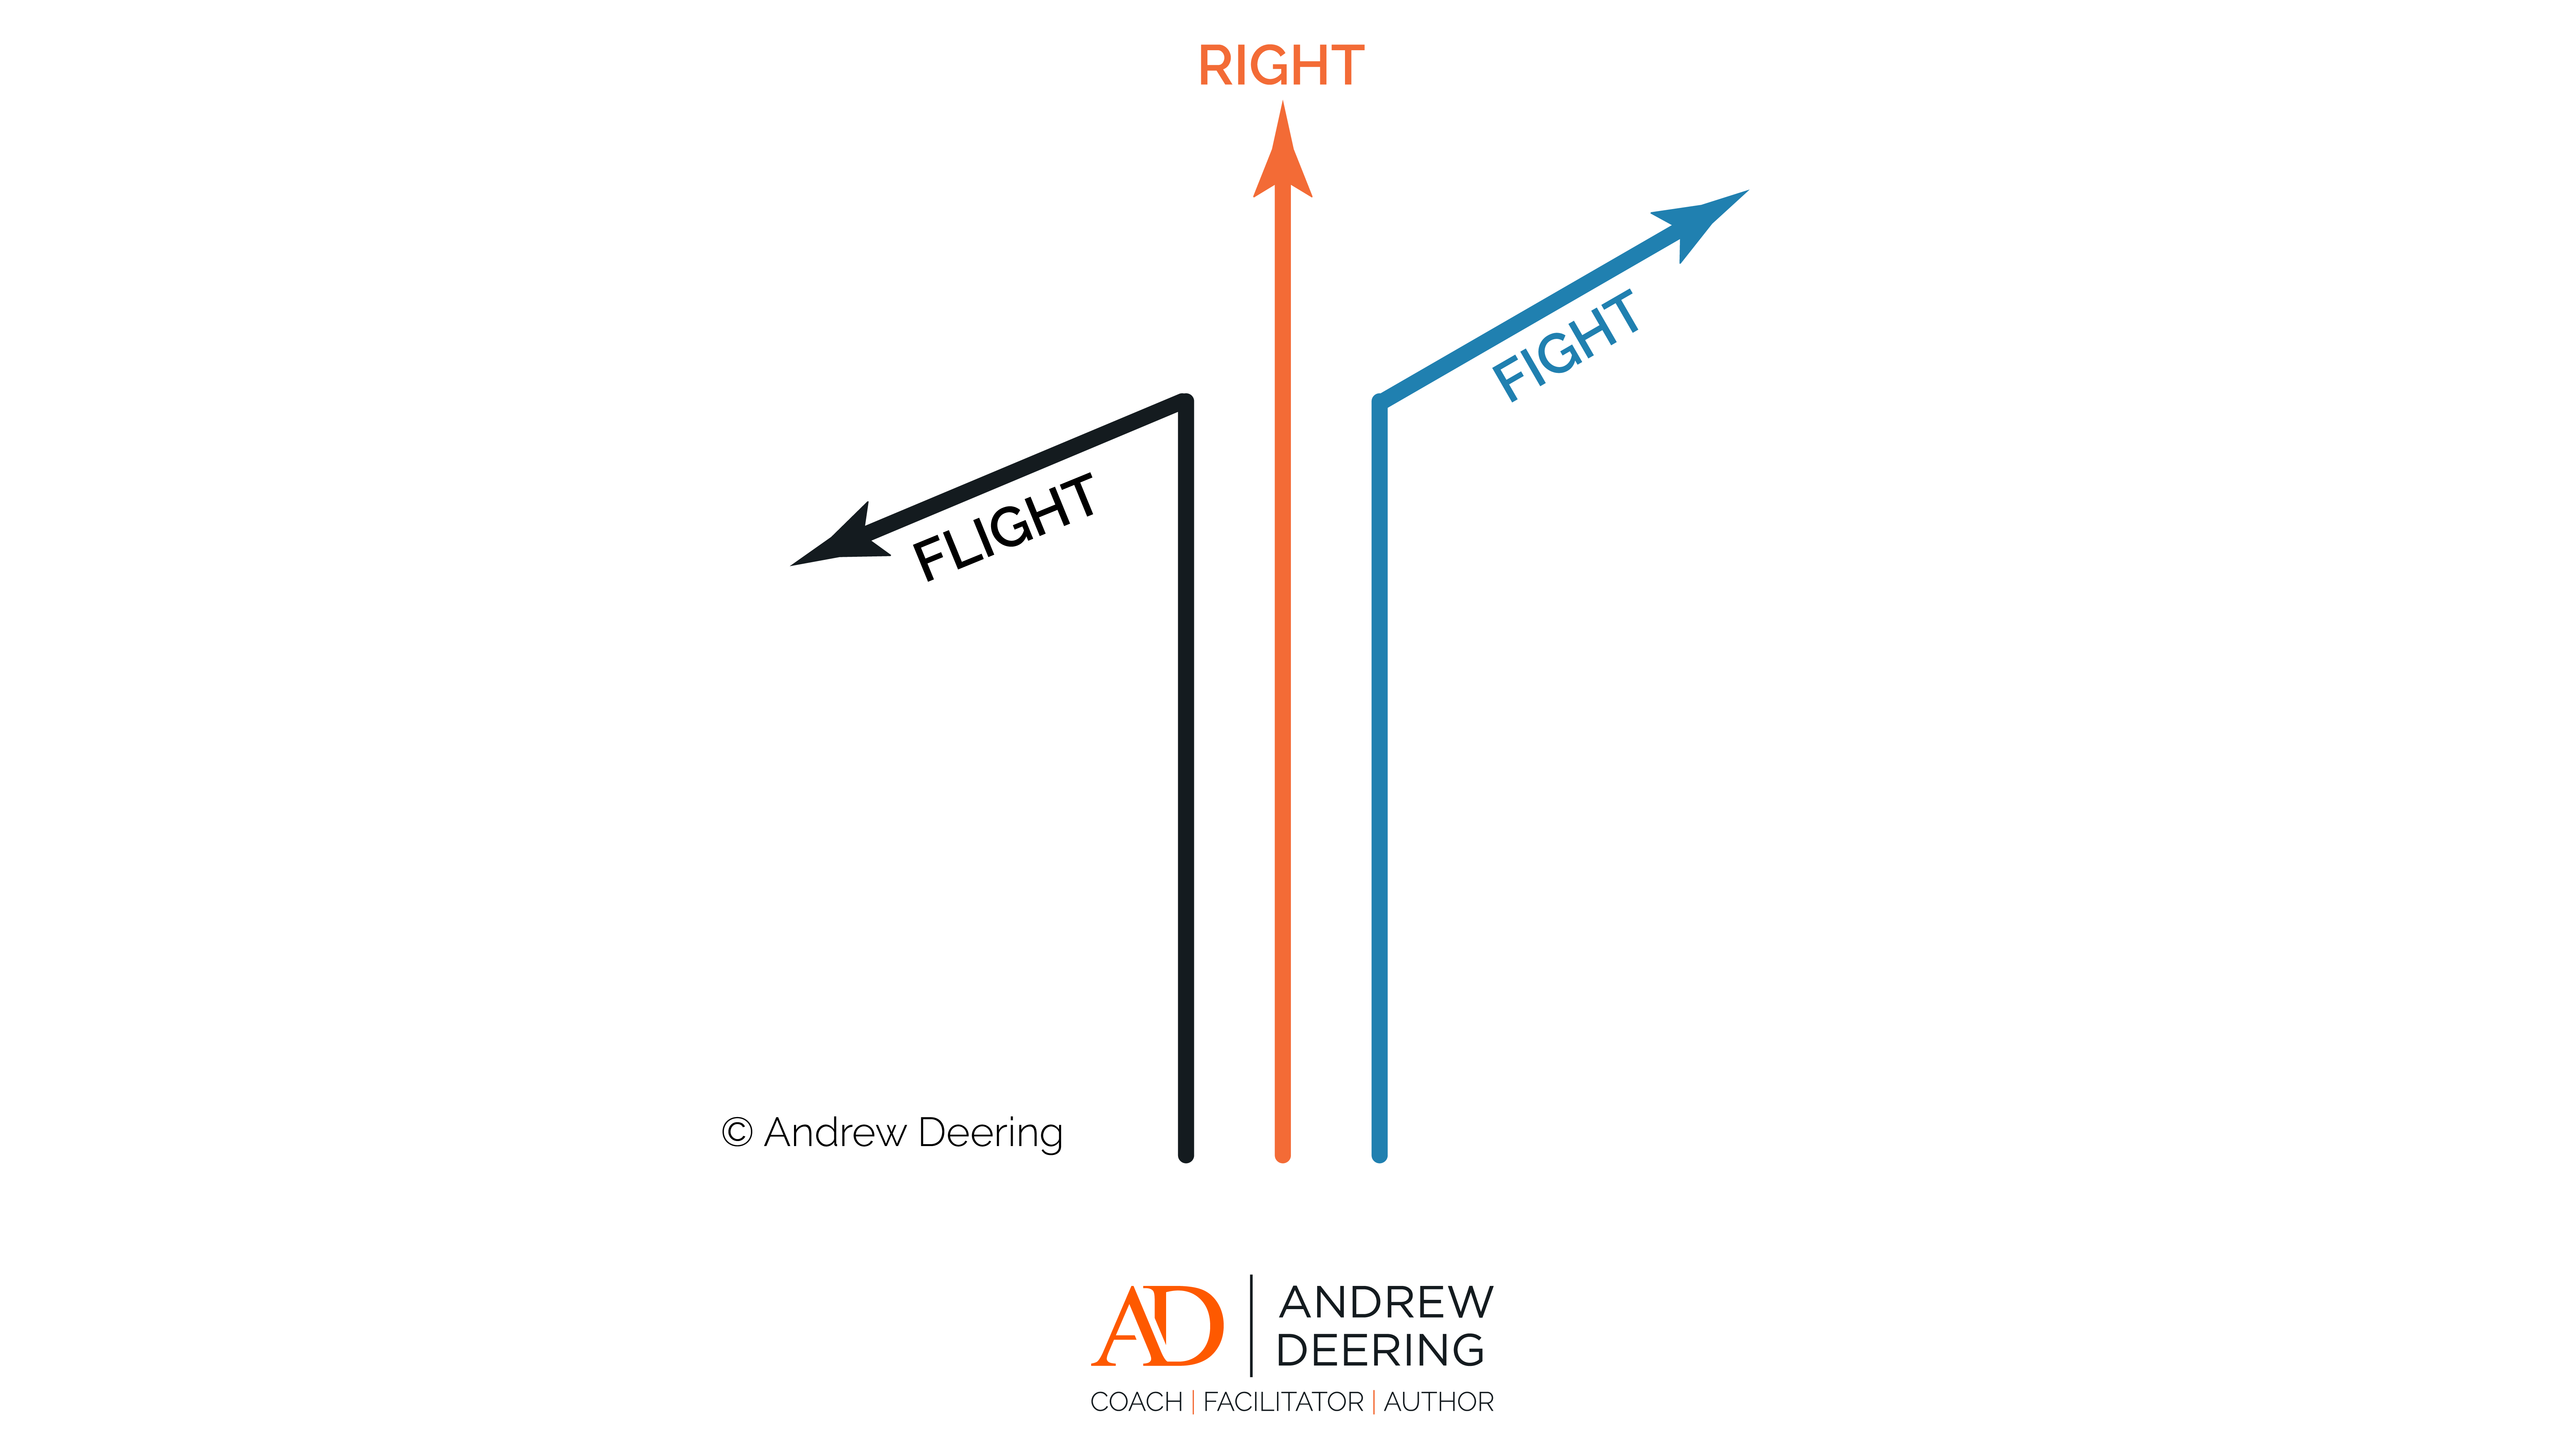 Fight flight or right model by Andrew Deering, coach, mentor, facilitator, author